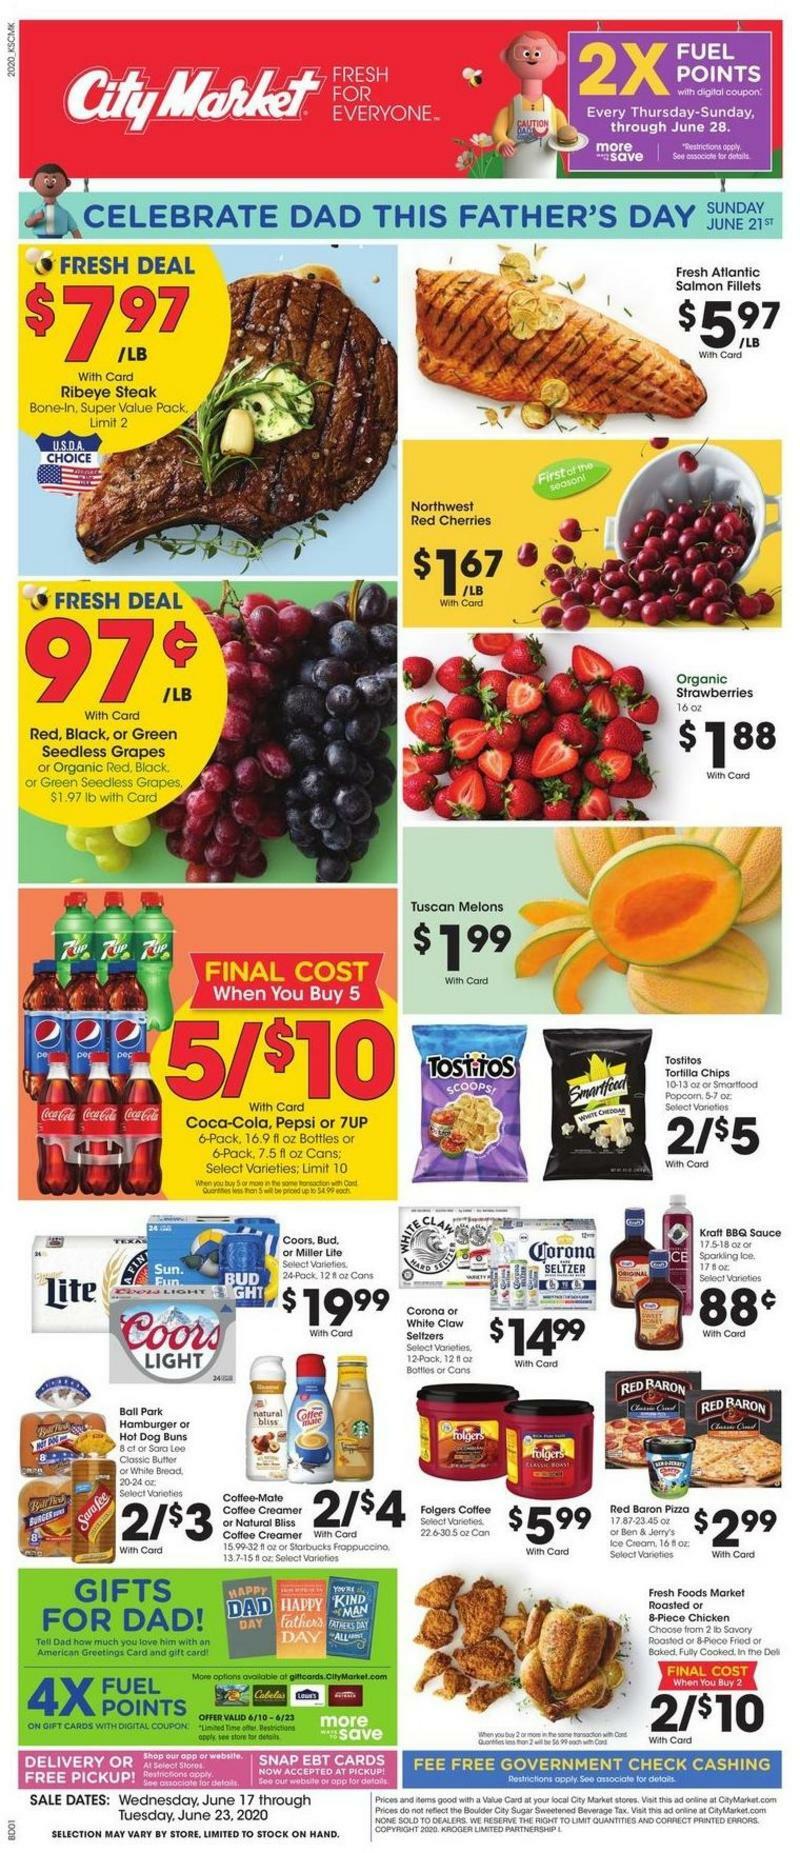 City Market Weekly Ads & Special Buys from June 17